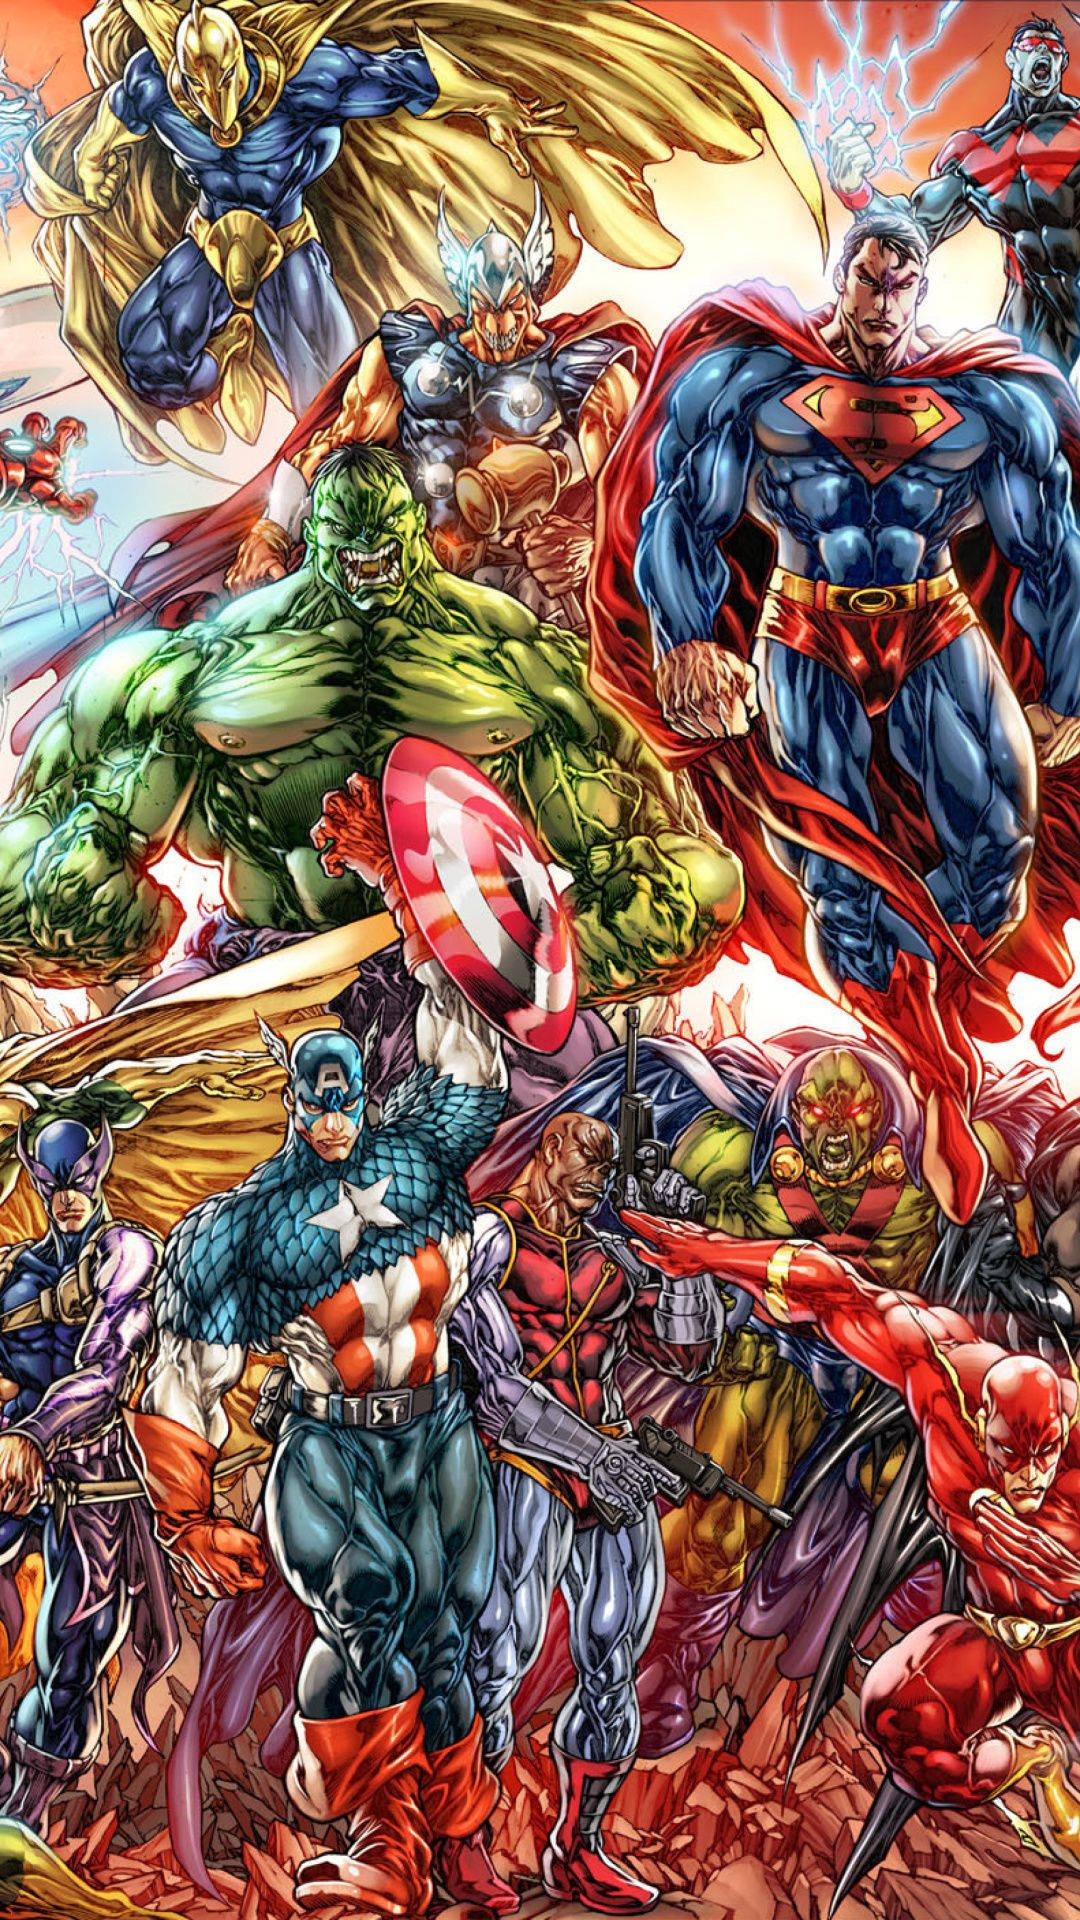 Marvel comics colorful background with heroes and villains.